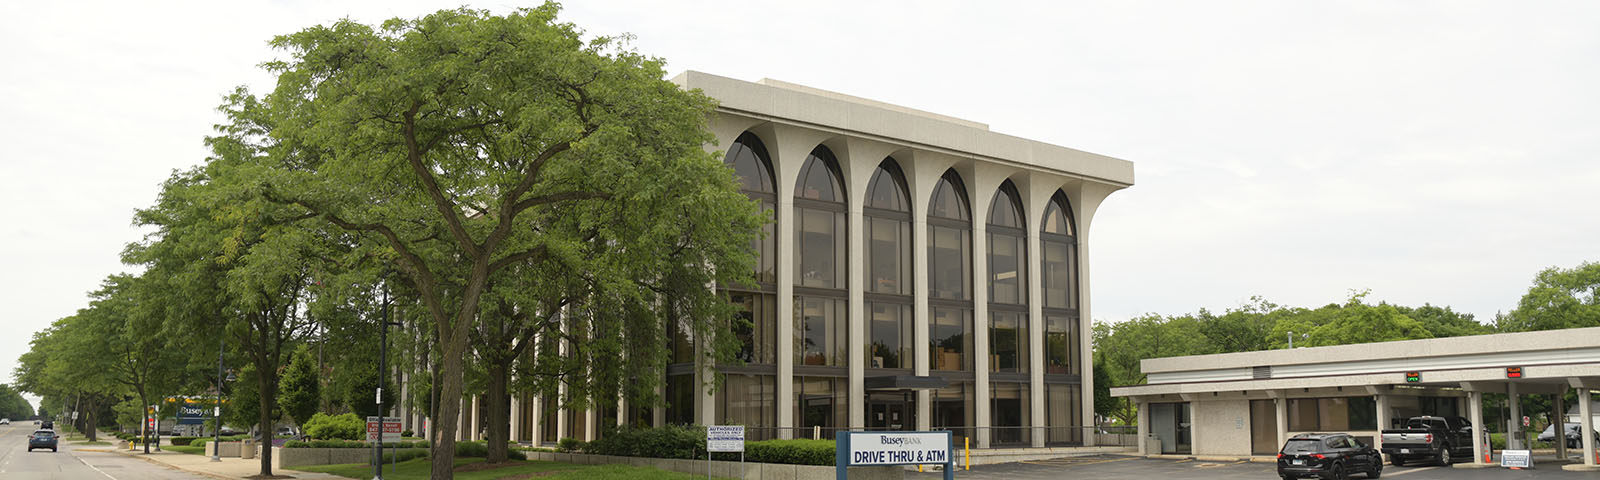 Busey Bank Downtown Glenview Service Center